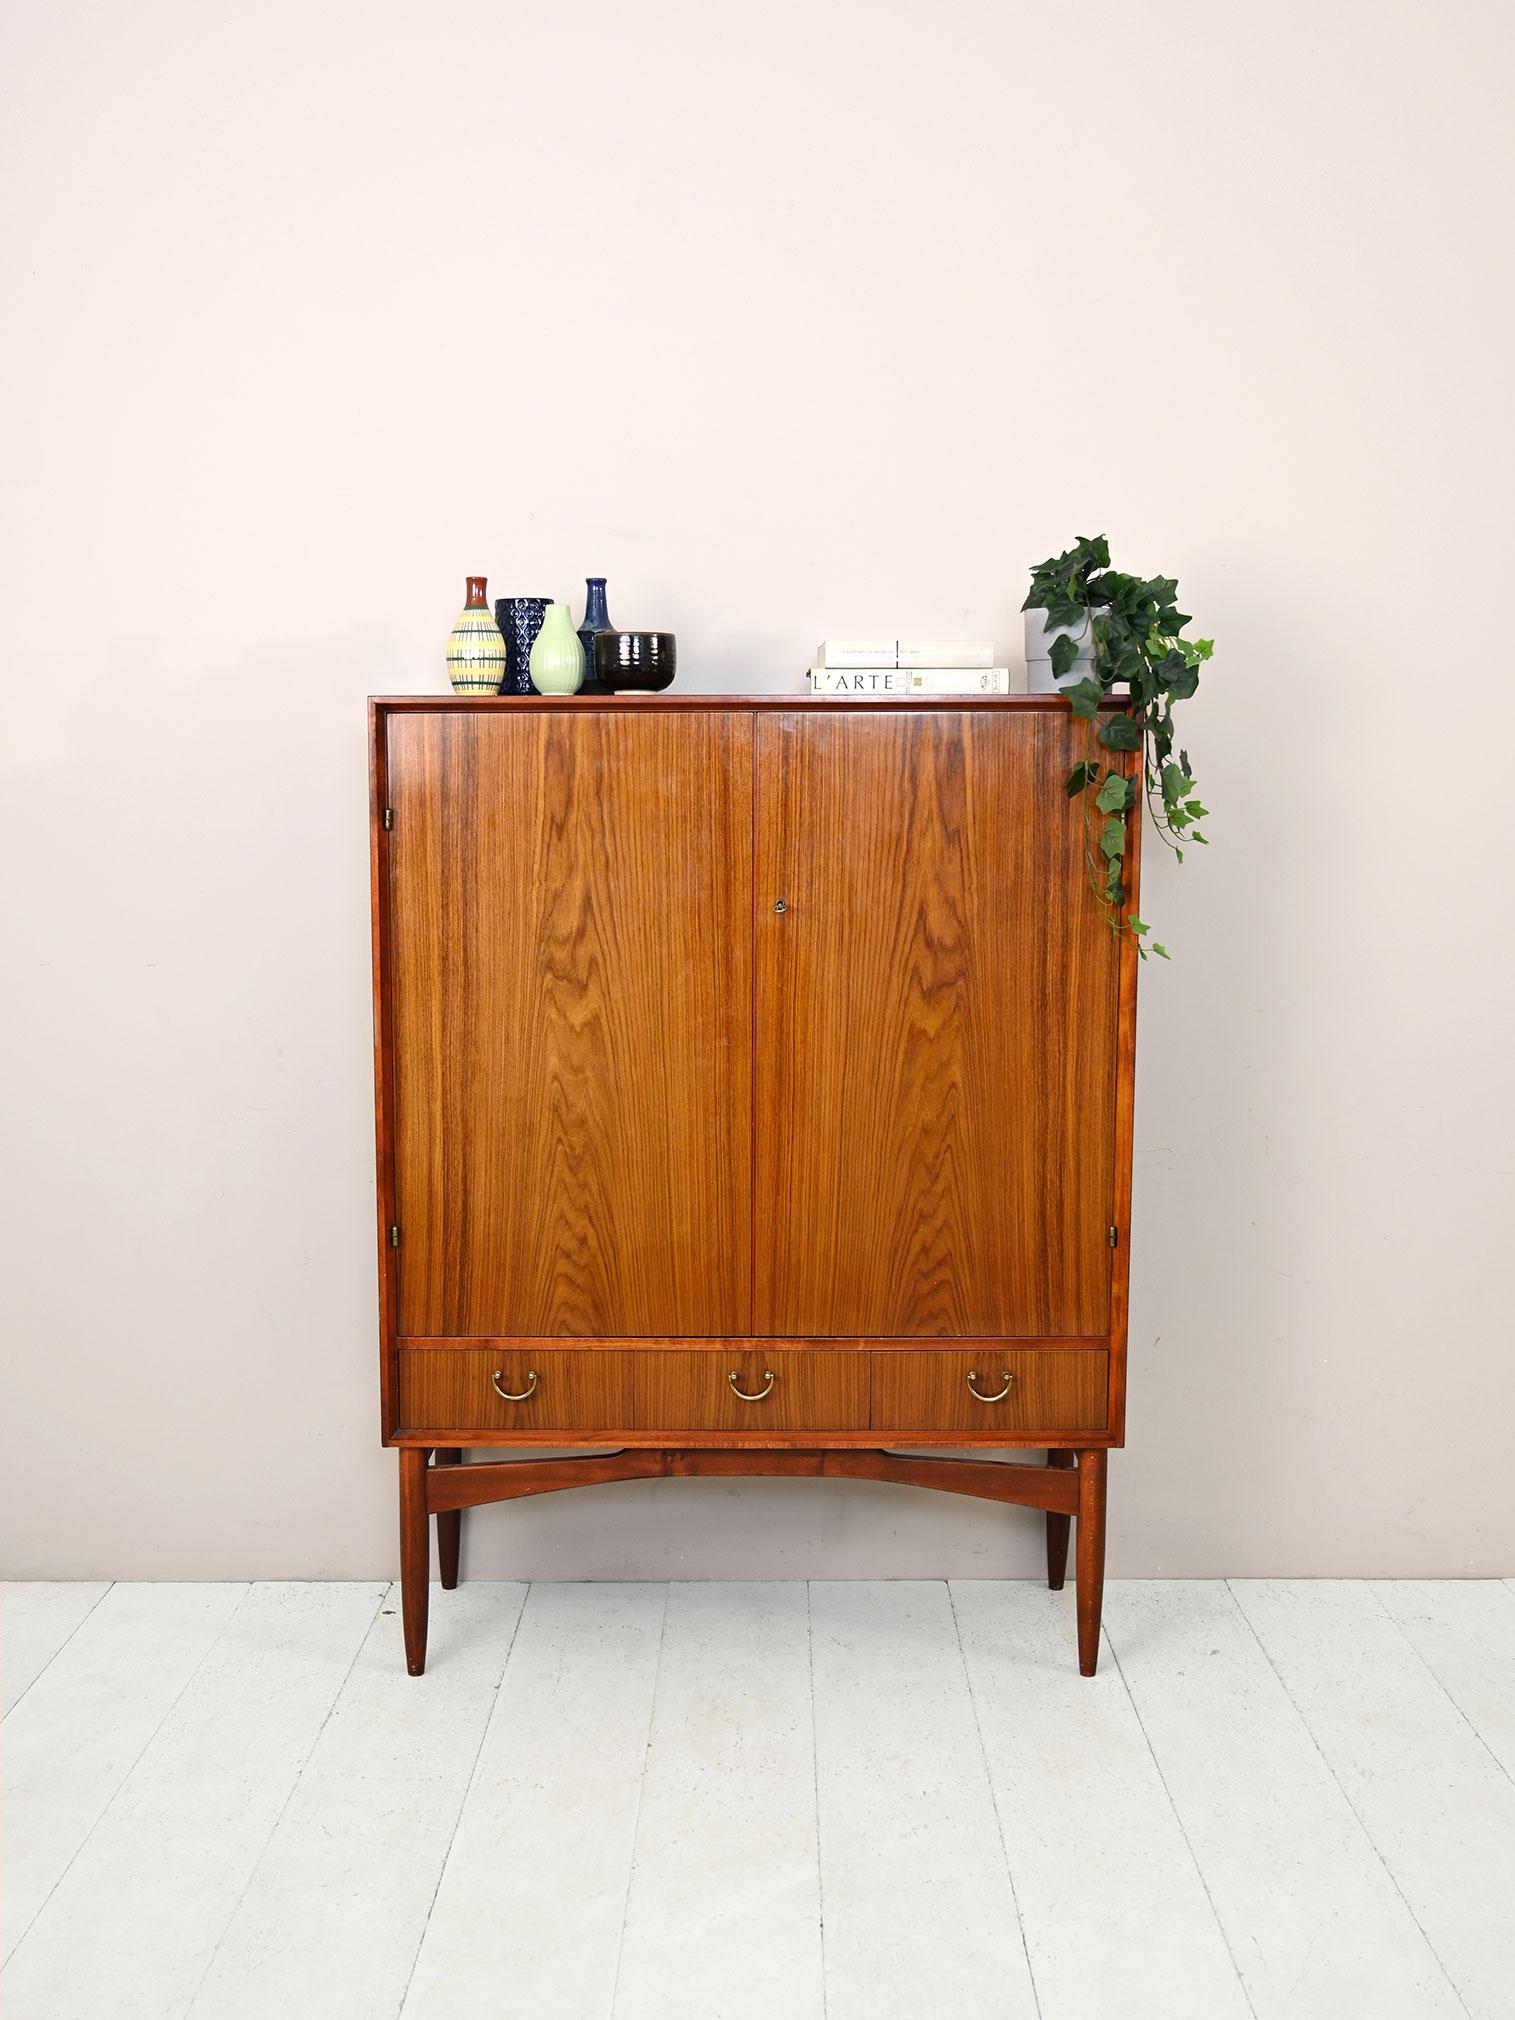 1950s cabinet with shelves and drawers.
 
An original vintage furniture piece with a retro flavor. The gilded doors and handles on the drawers echo the vintage taste and style.
The slender legs slender the frame and give it a modern look.
Ideal